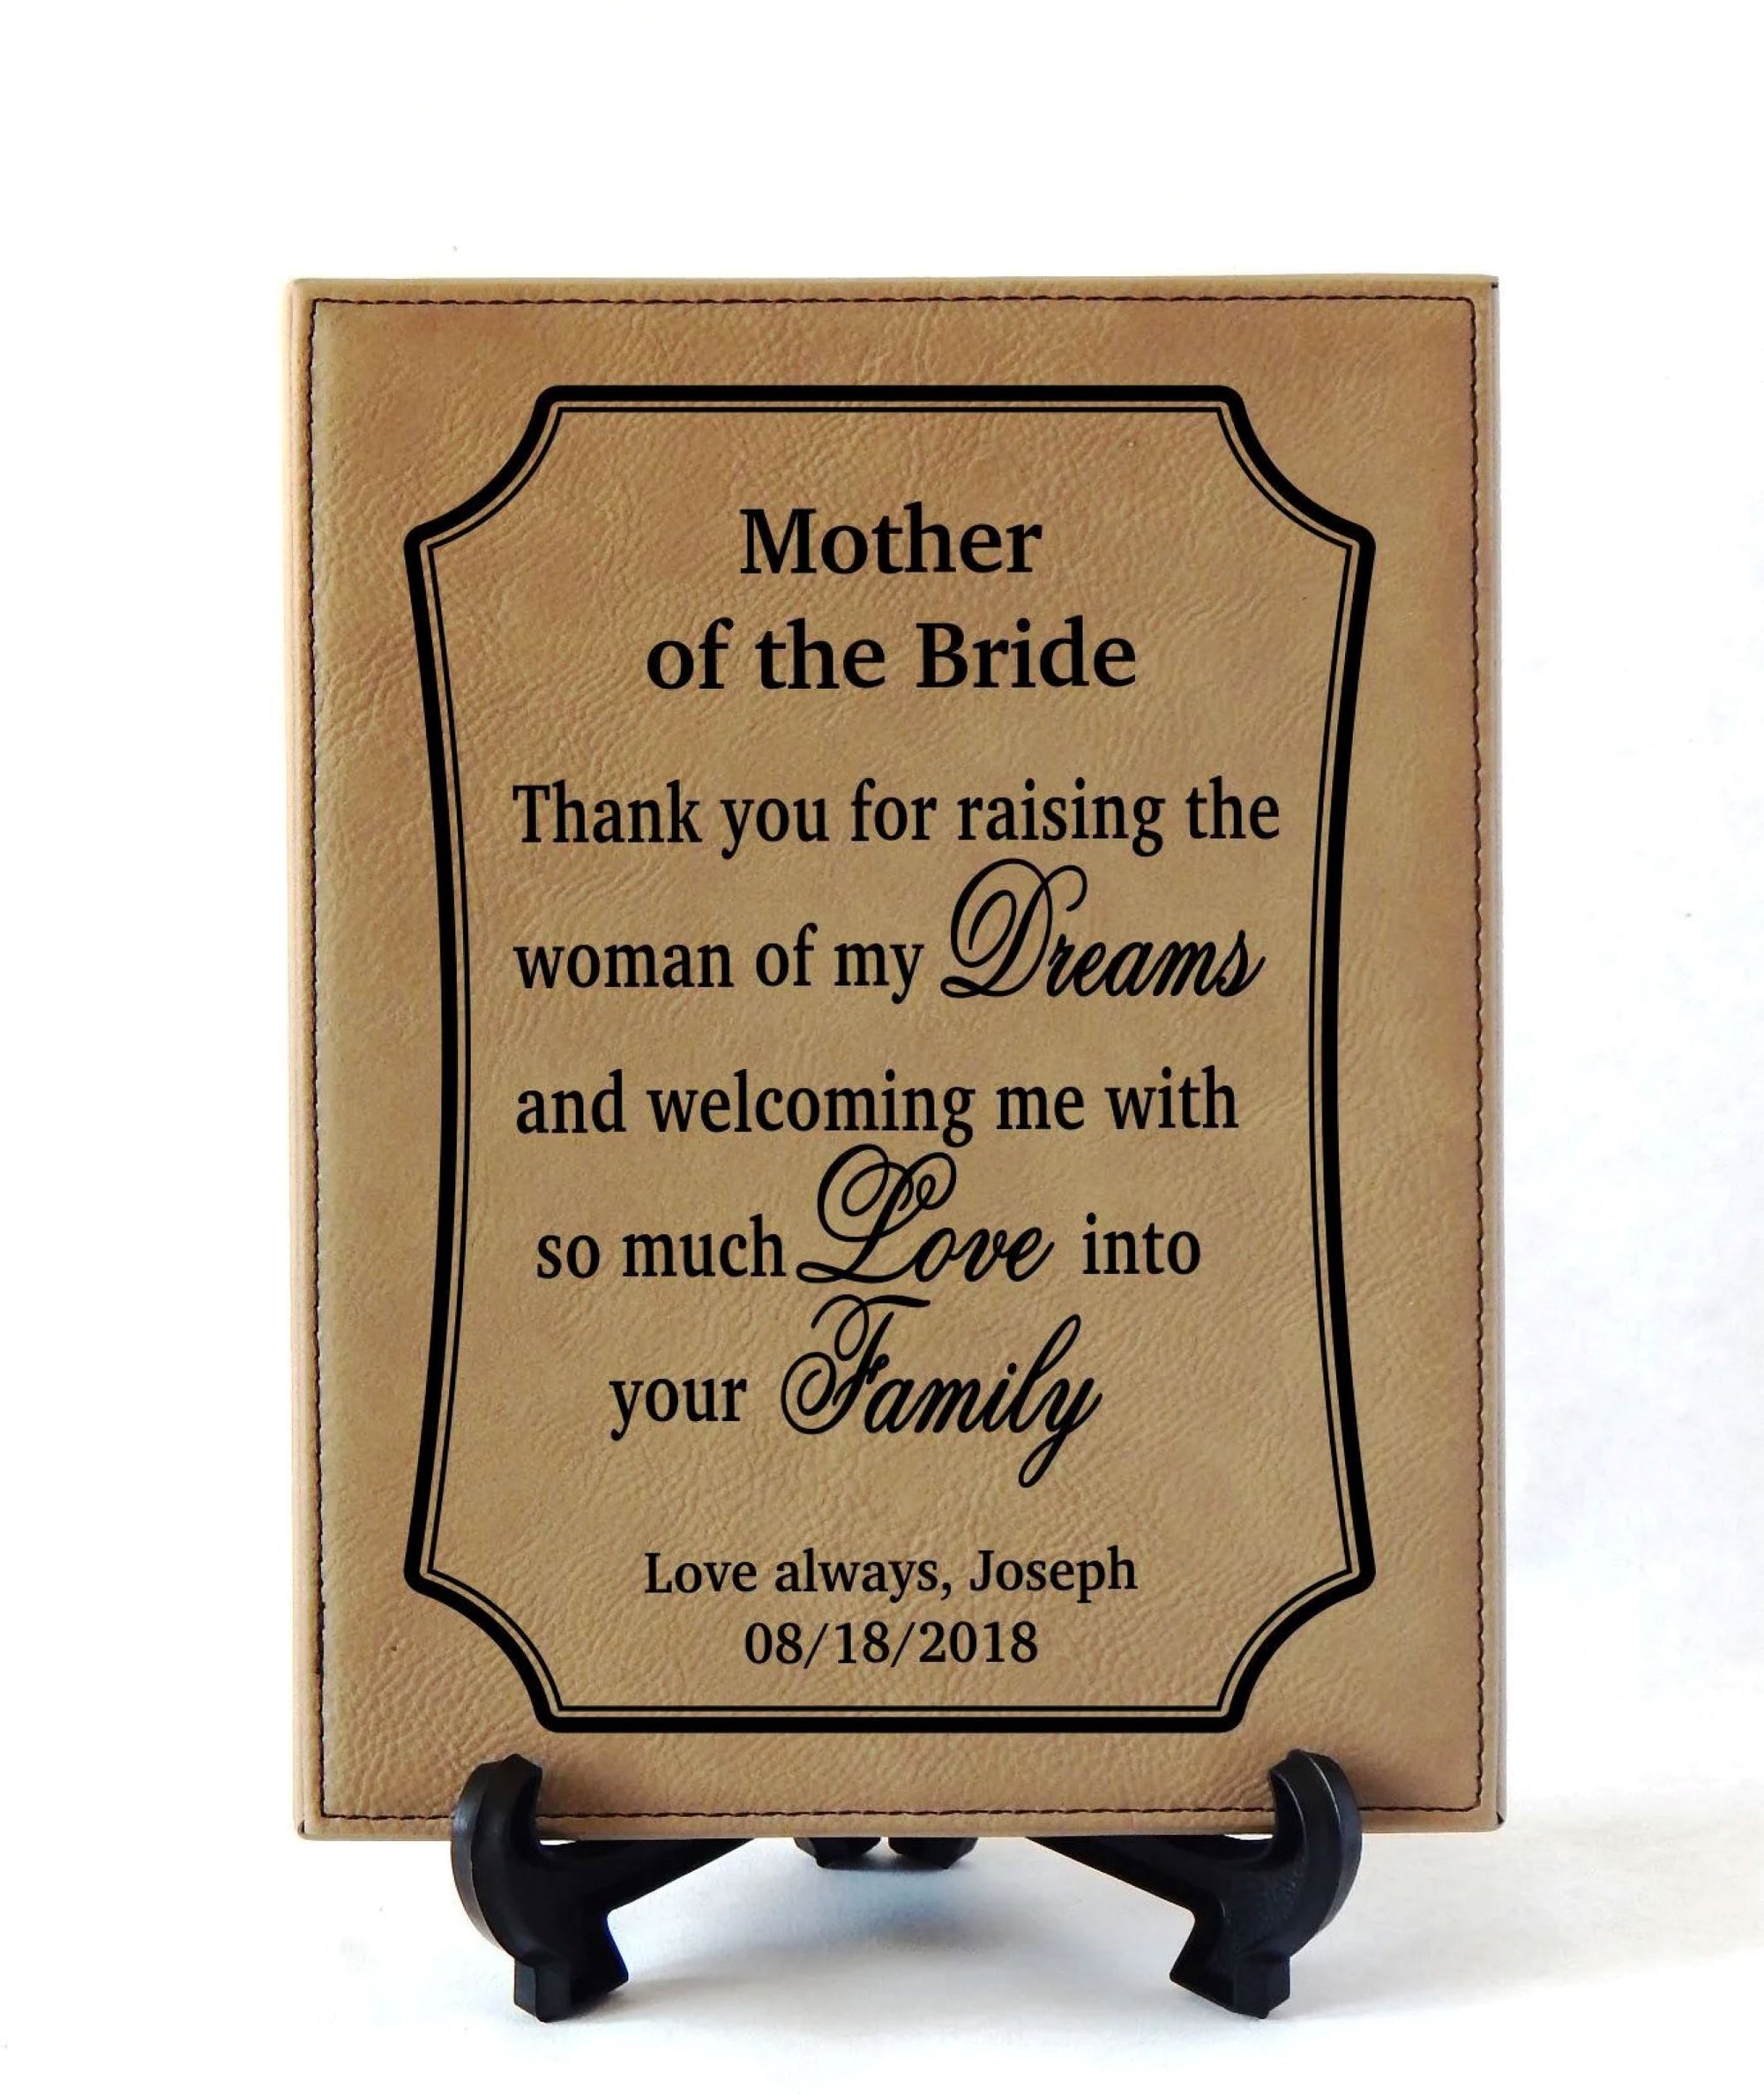 Mother of the Bride Gift from Groom | Wedding Thank you Gift for Parents Engraved Plaque